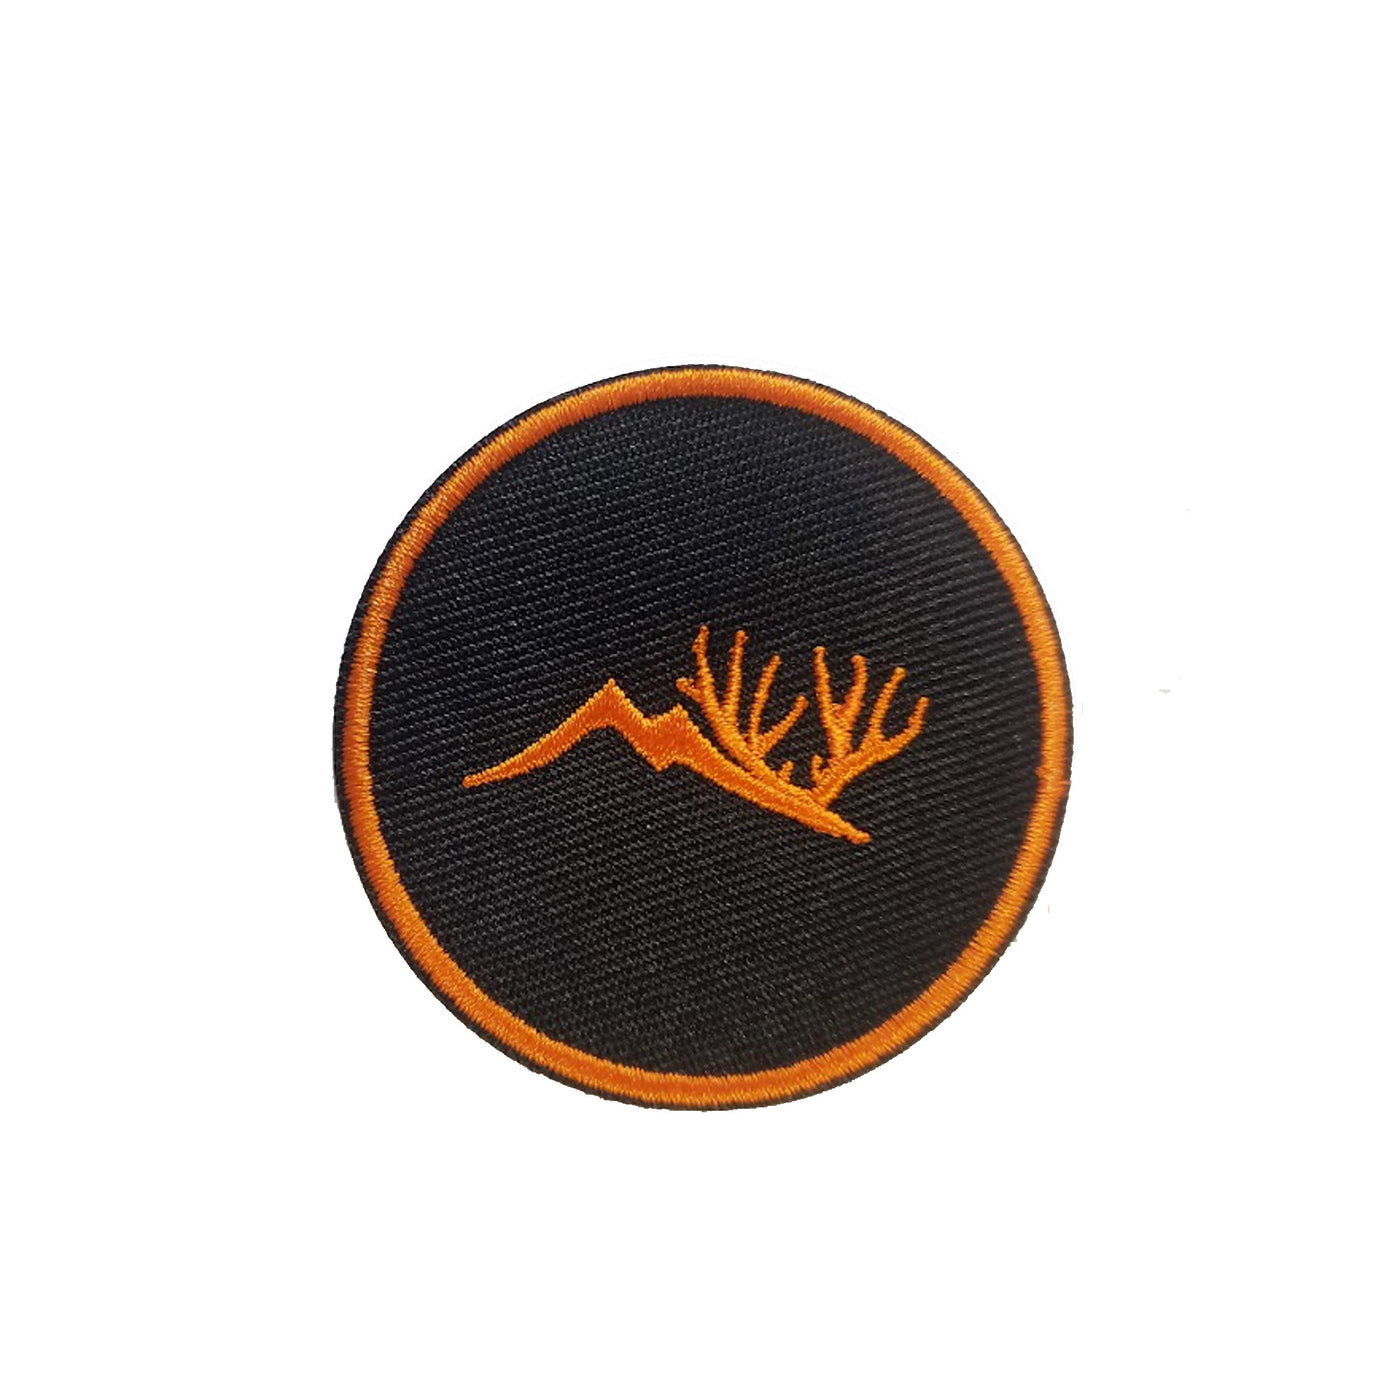 Altitude outdoors circle logo iron on hat patch